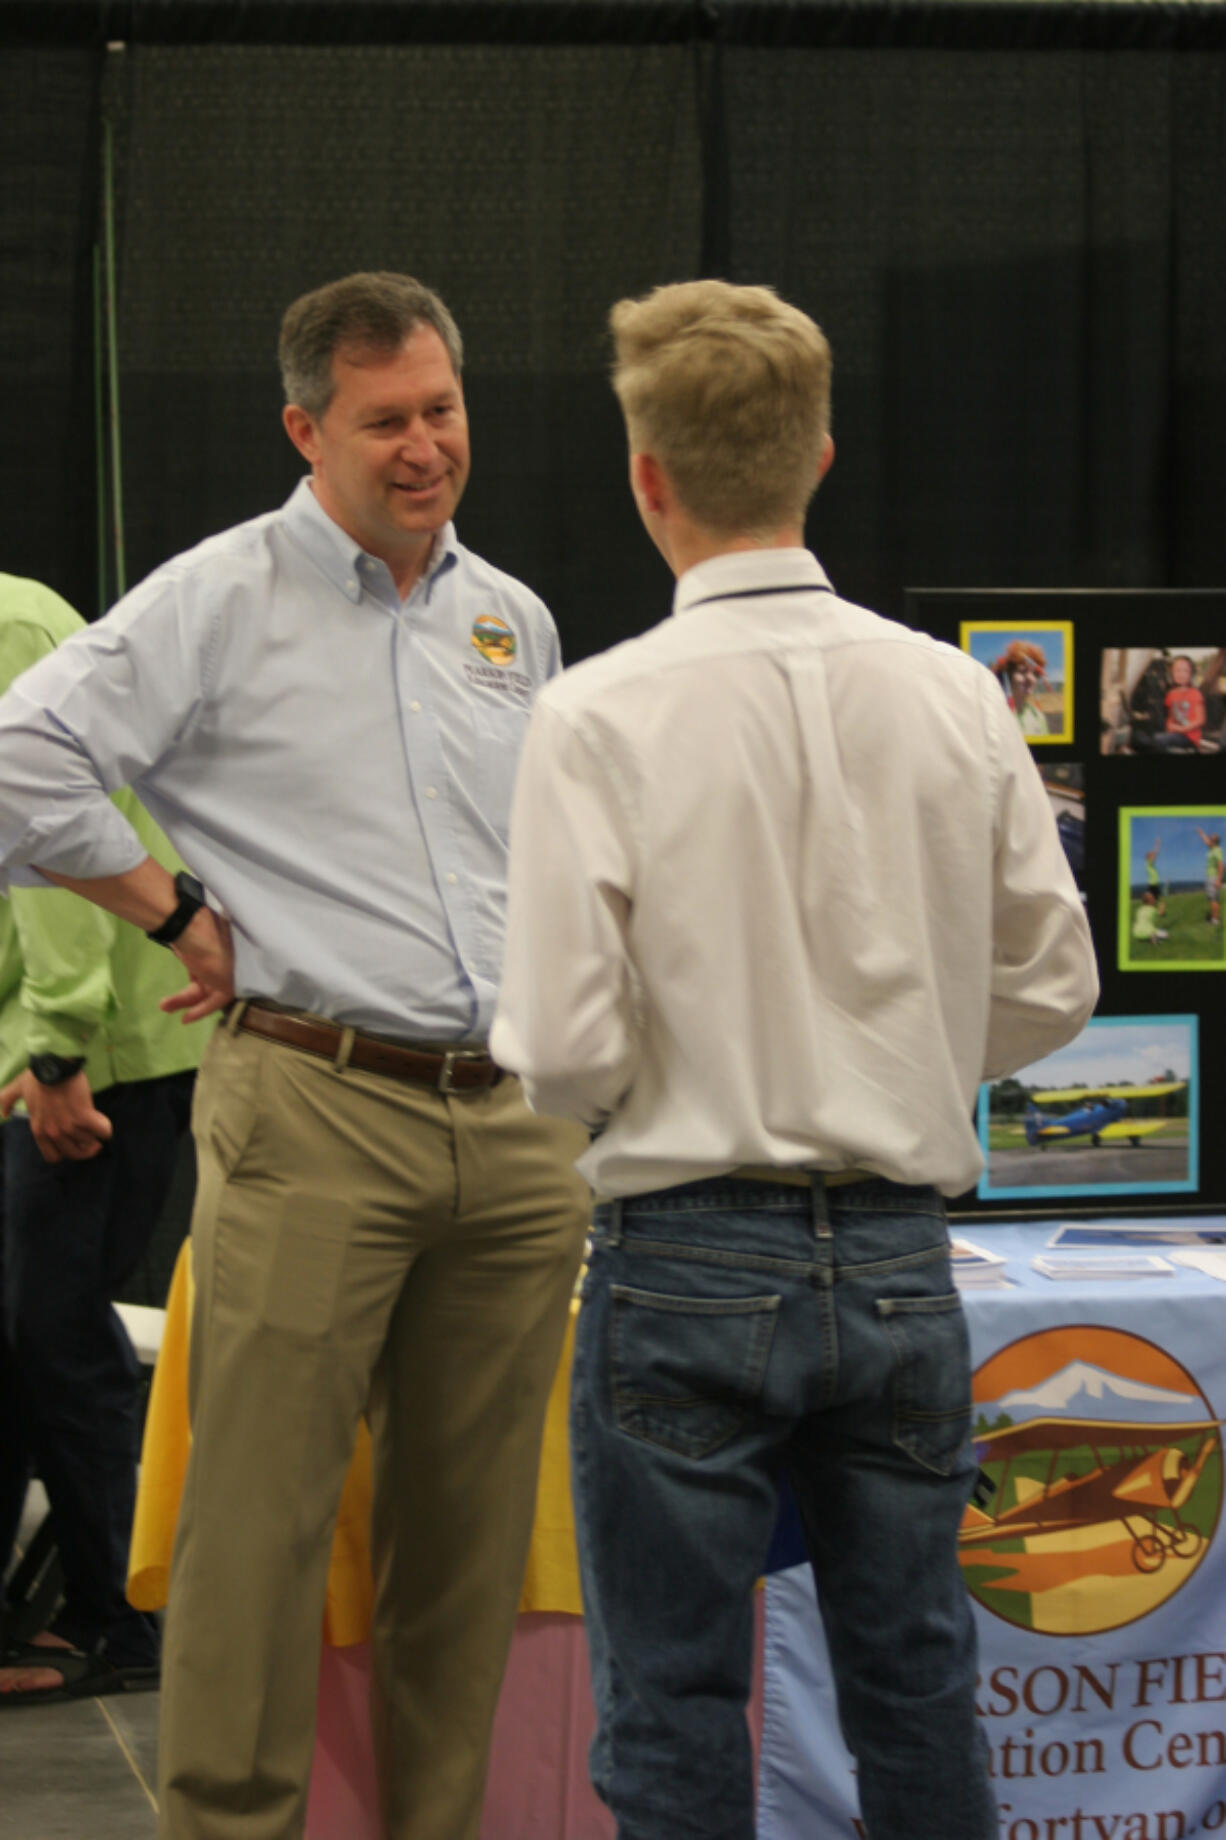 Ridgefield: A representative from the Pearson Field Education Center talks to a student at a Youth Employment Summit at the Clark County Event Center at the Fairgrounds on May 23, where teenagers learned about summer employment options, practiced mock interviews and applied for jobs.